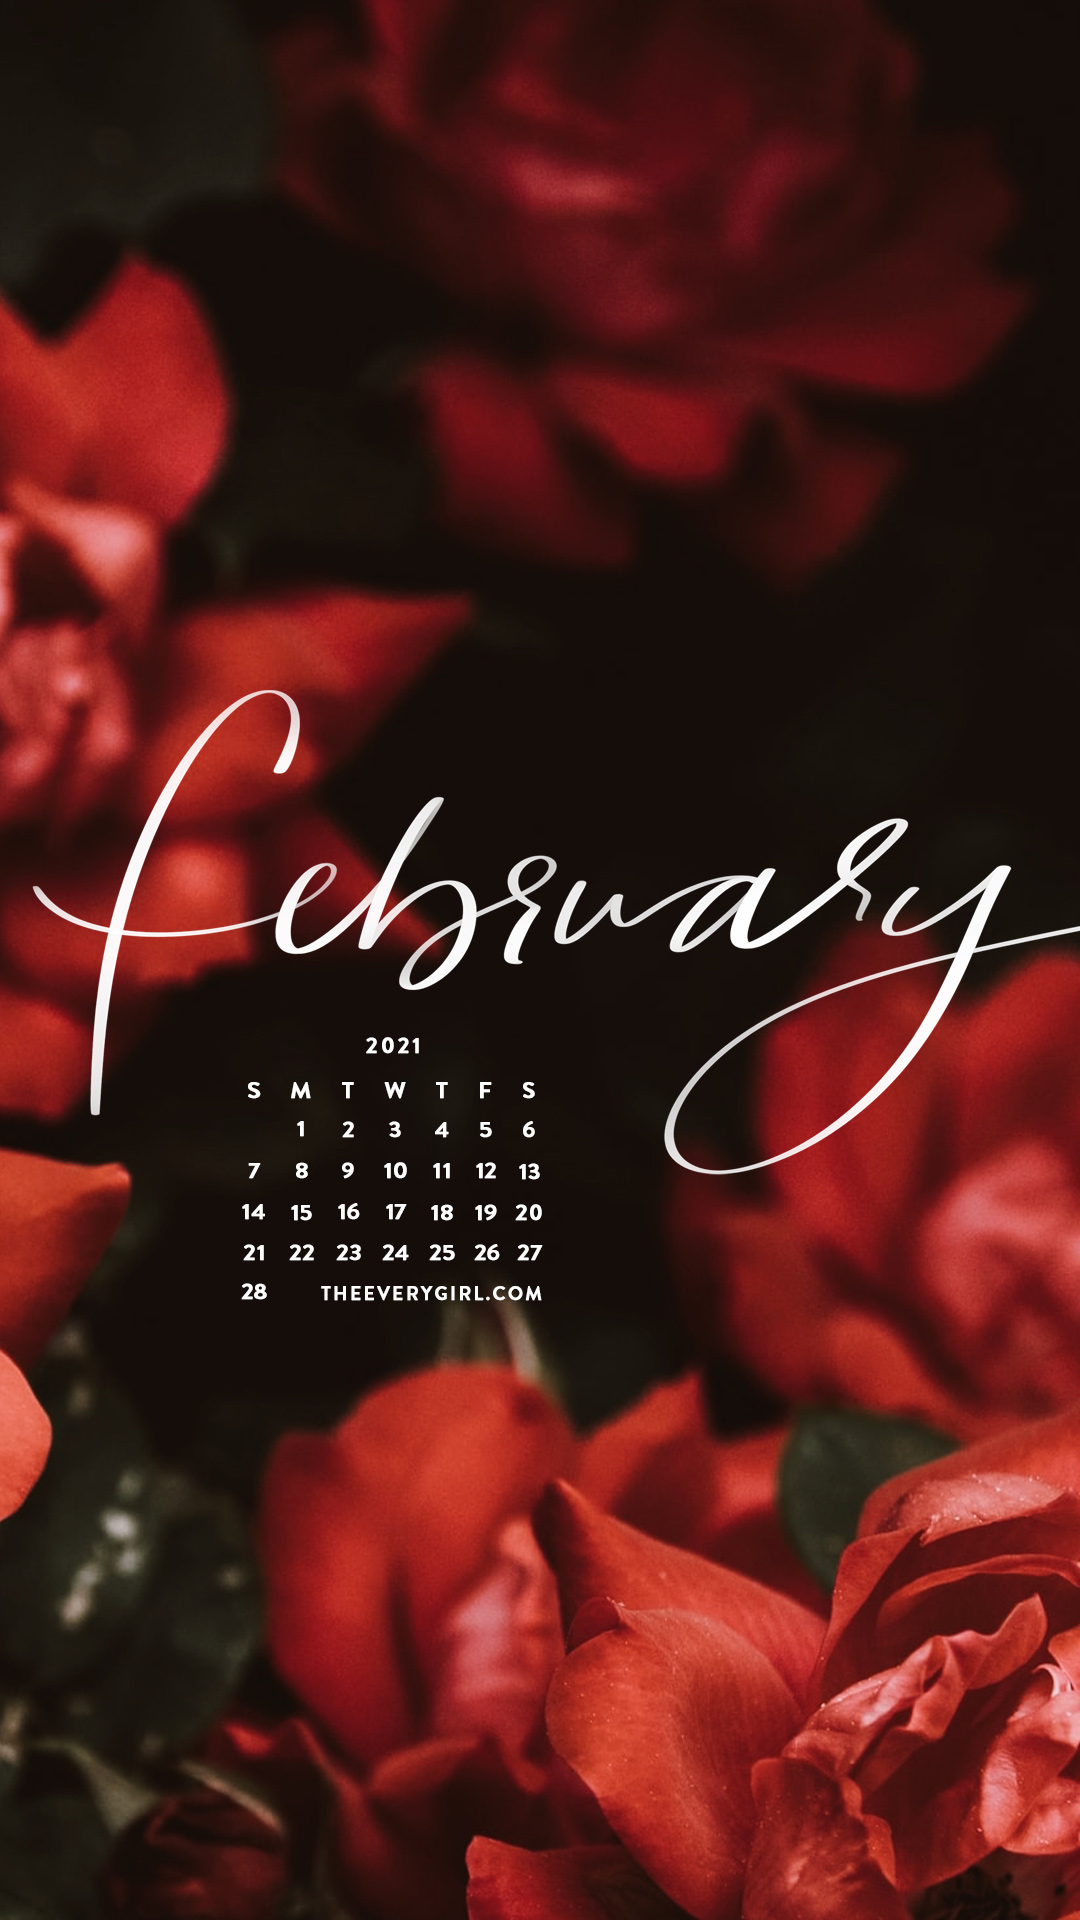 February Free Wallpapers